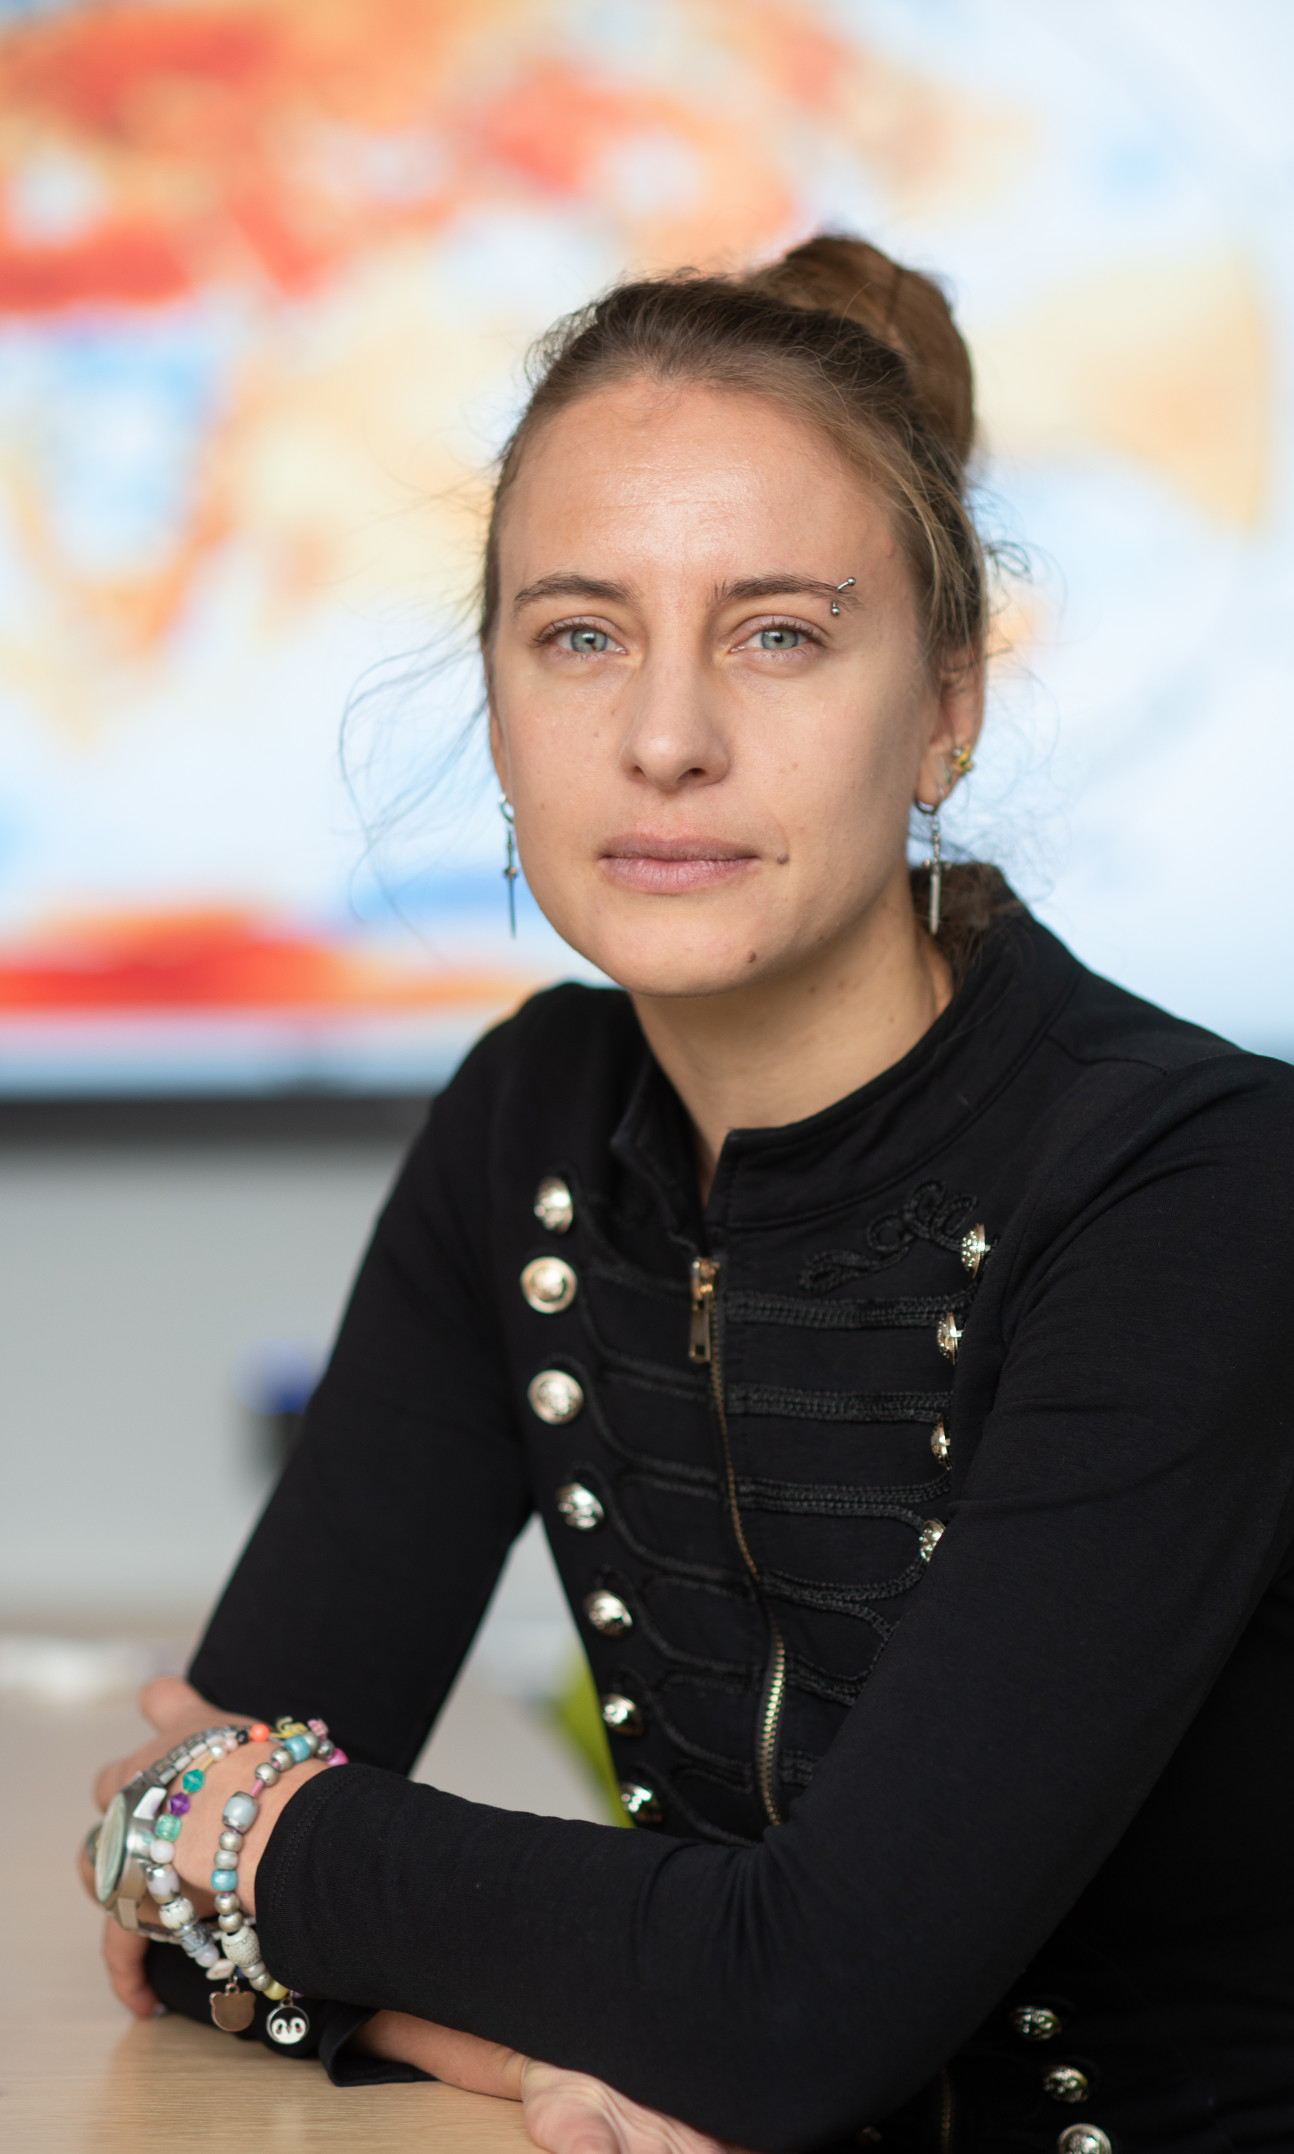 Professor Friederike Otto, from Imperial's Grantham Institute for Climate Change